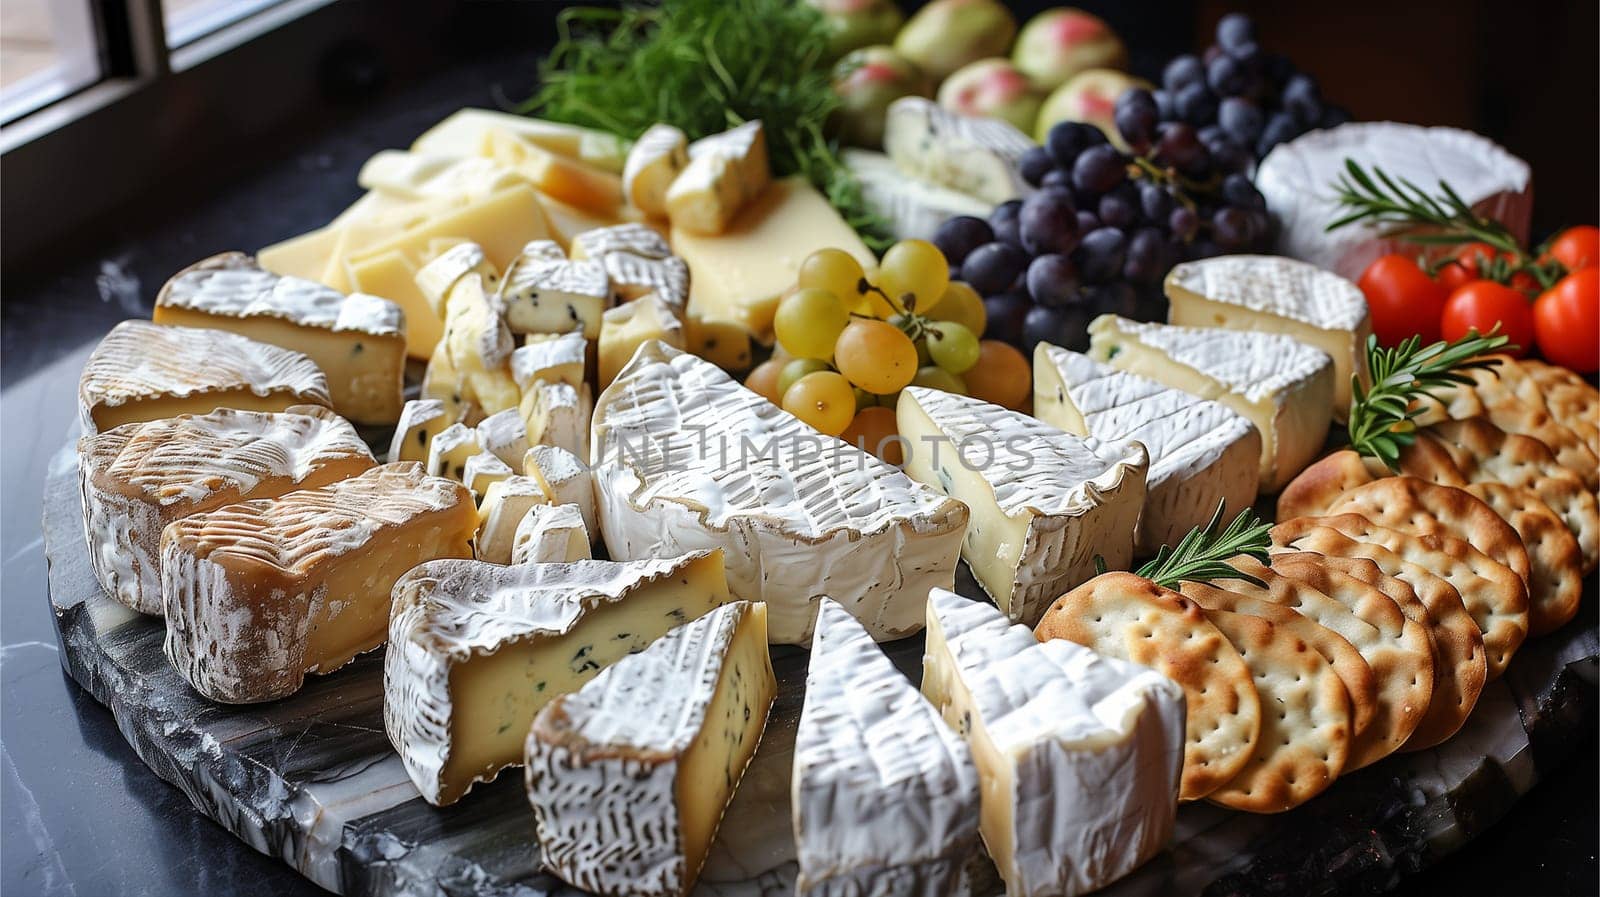 A varied selection of cheeses and fresh fruits arranged on a platter atop a wooden table.